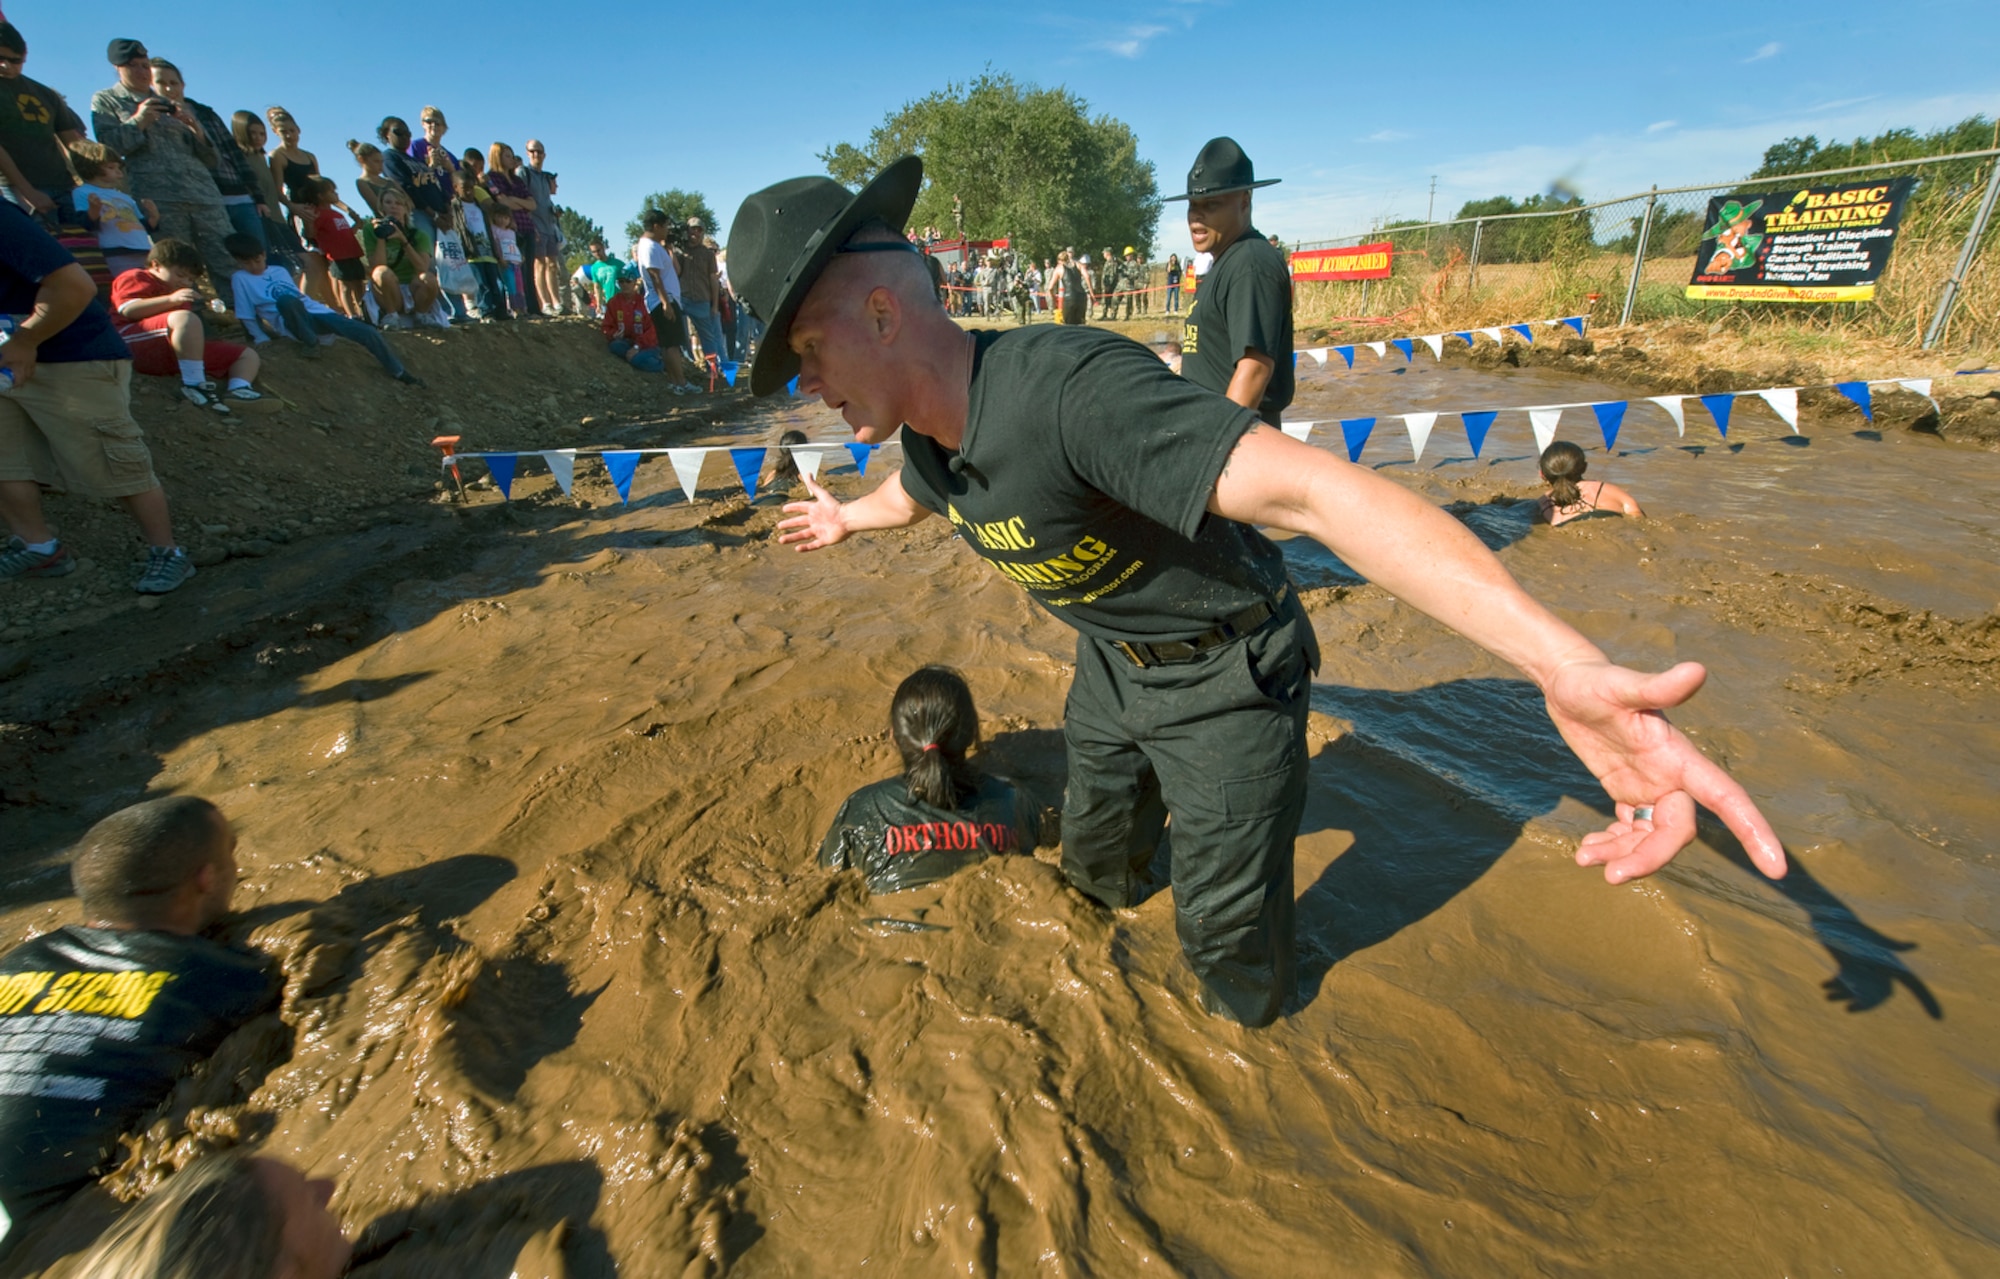 Drill Instructors from Marine Corps Recruit Depot San Diego motivate participants through the 10th Annual Mather Mud Run in Rancho Cordova, Calif., Sept. 5, 2009, for Air Force Week Sacramento. The Mud Run features a 5-mile or 2-mile obstacle course boot camp challenge with low walls, tunnel crawls, a tire run, hay bale jumps and a low-crawl mud pit.  (U.S. Air Force photo/Staff Sgt. Bennie J. Davis III) 